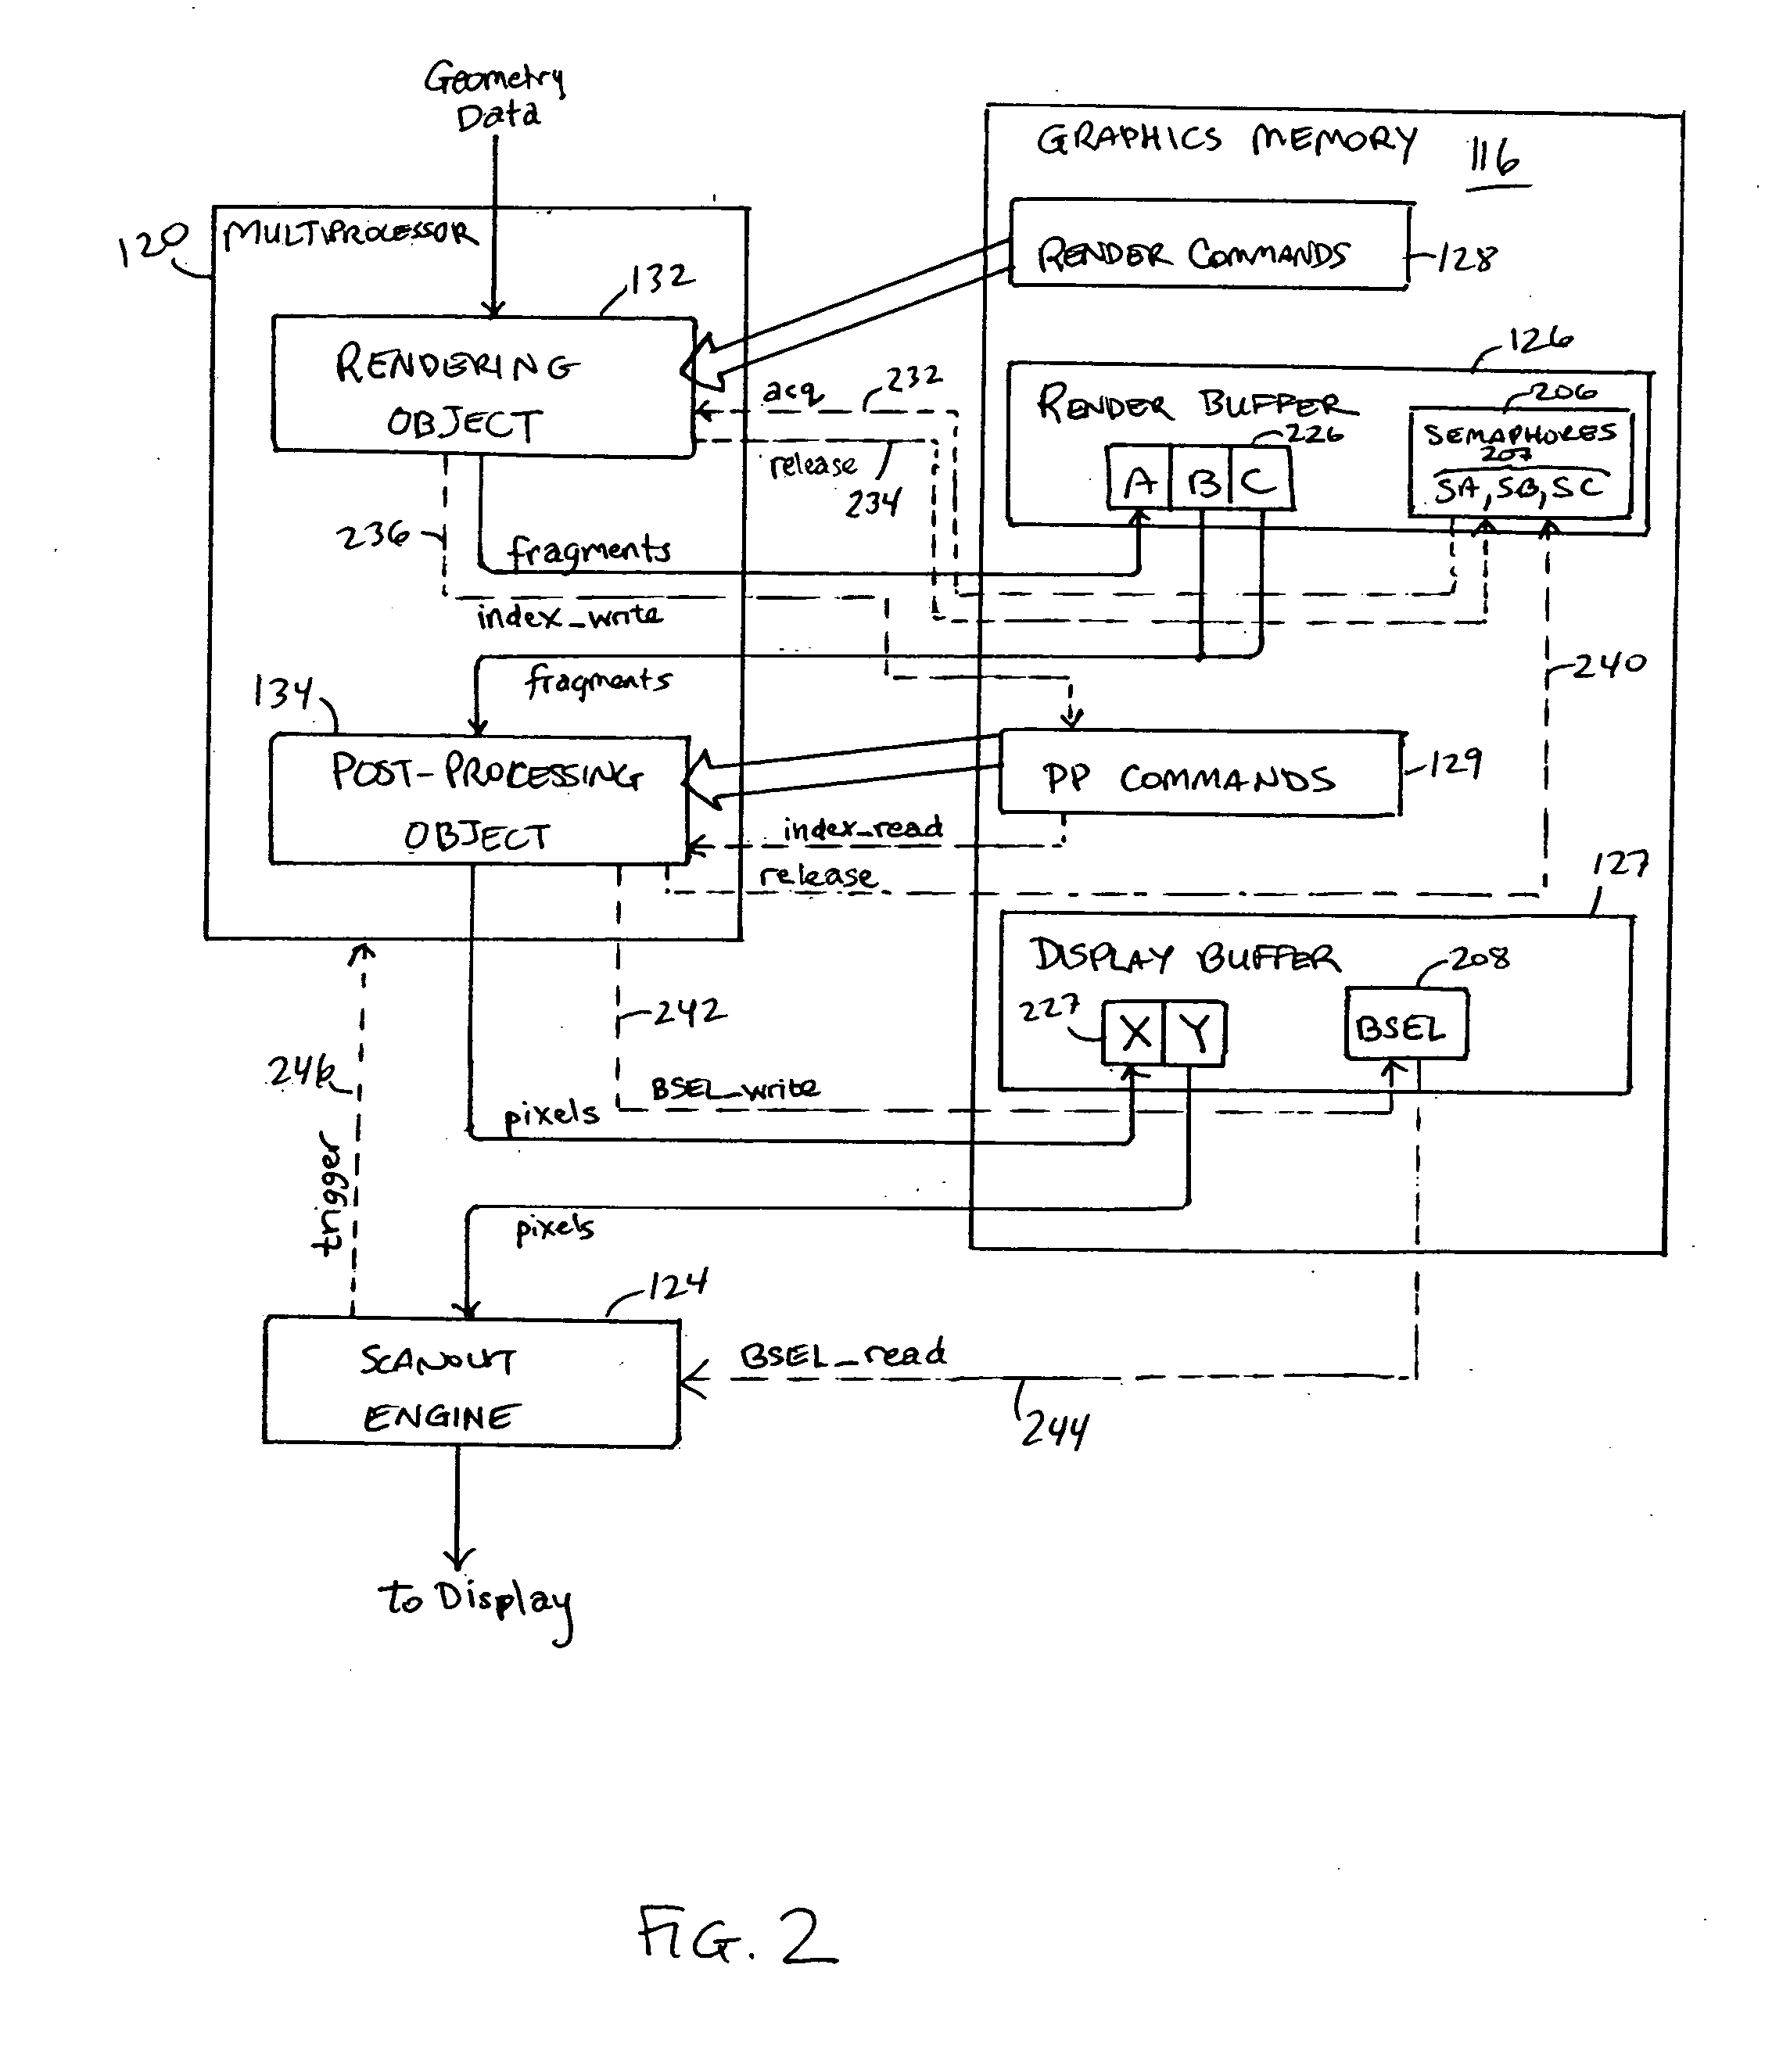 Real-time display post-processing using programmable hardware